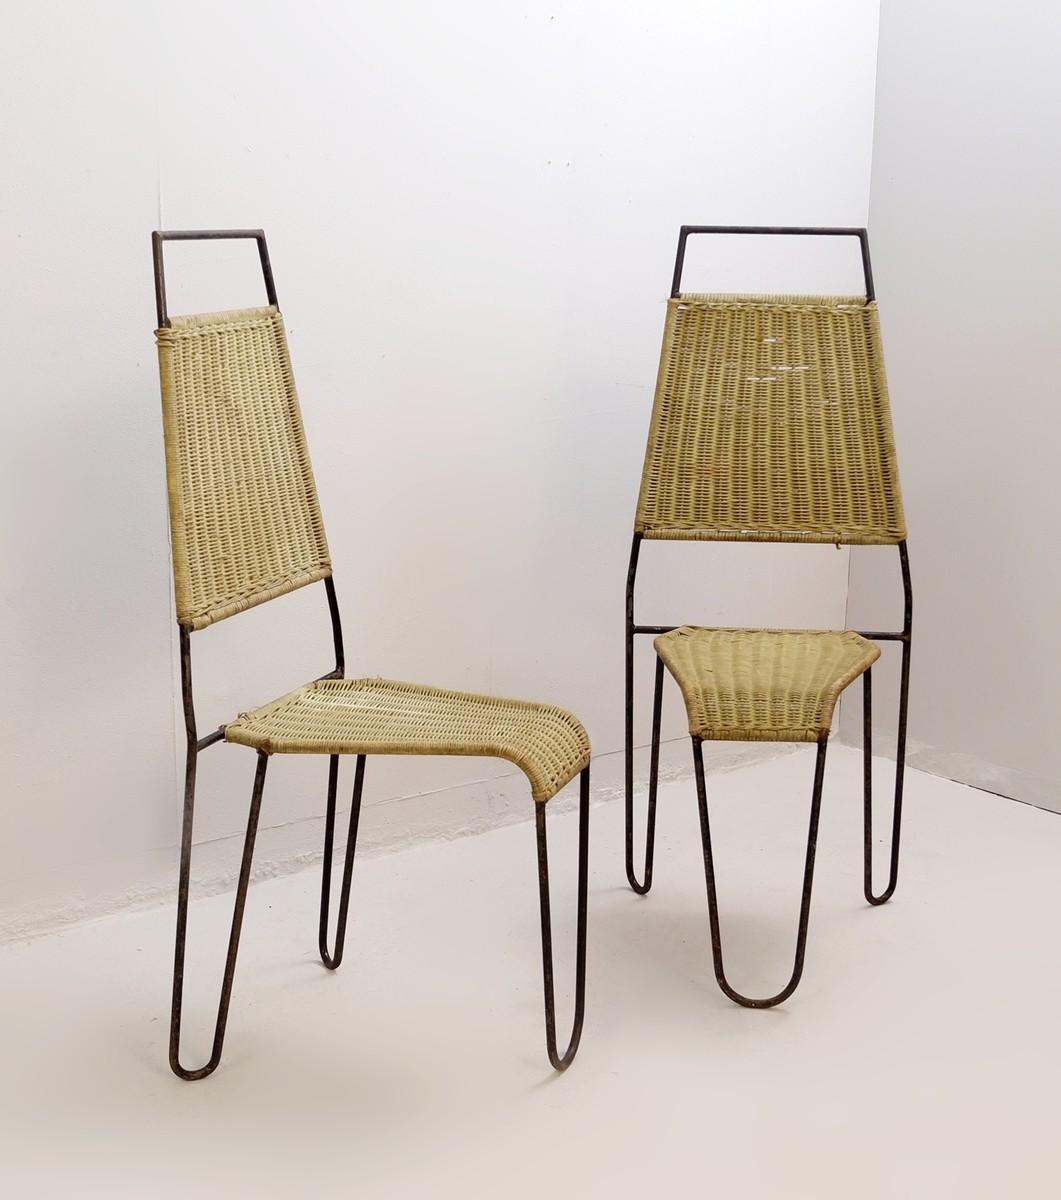 European Pair of Chairs in Wicker and Steel Attr. to Raoul Guys for Airborne, ca 1950